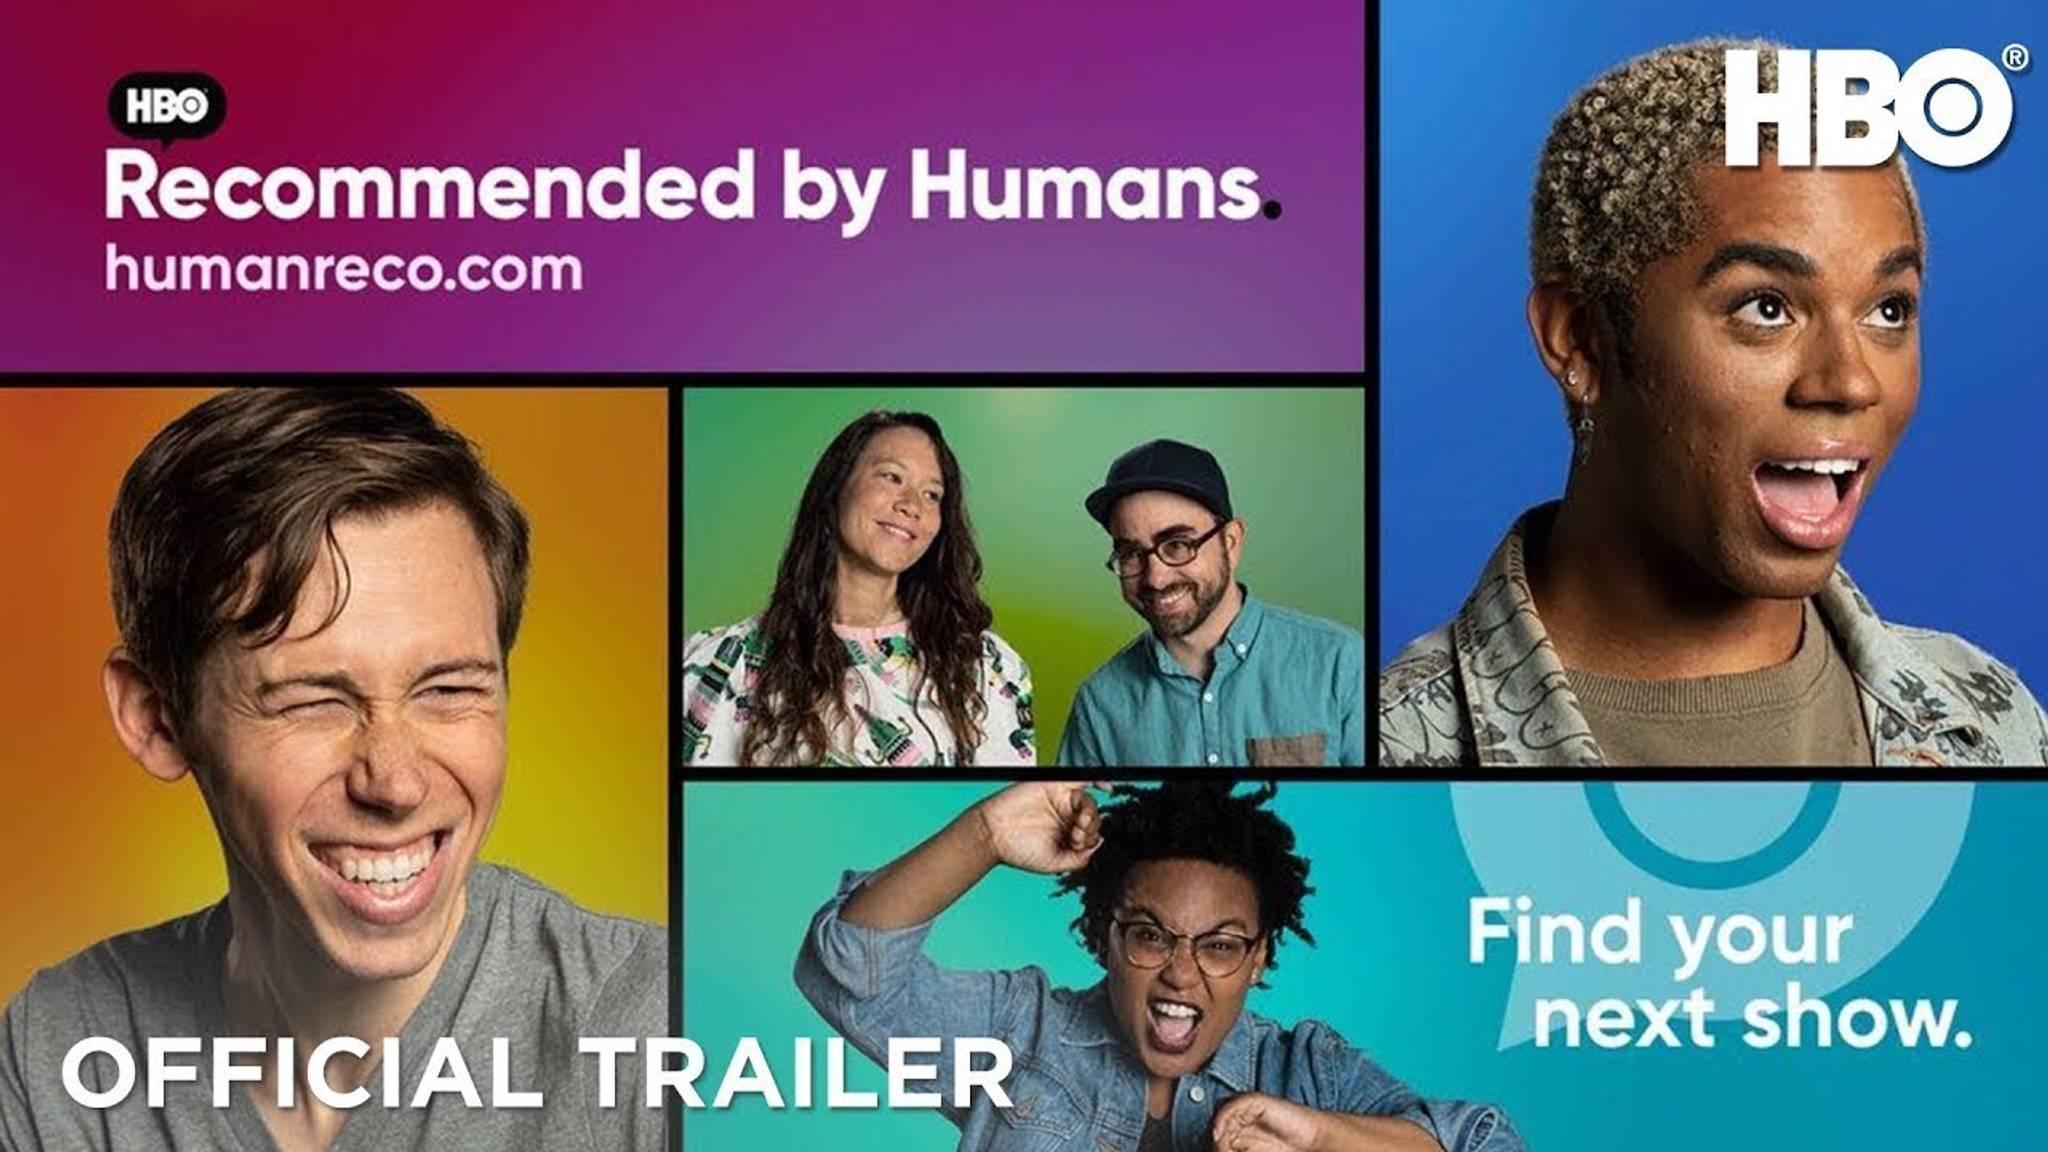 HBO human recommendation tool shuns ‘inauthentic’ AI